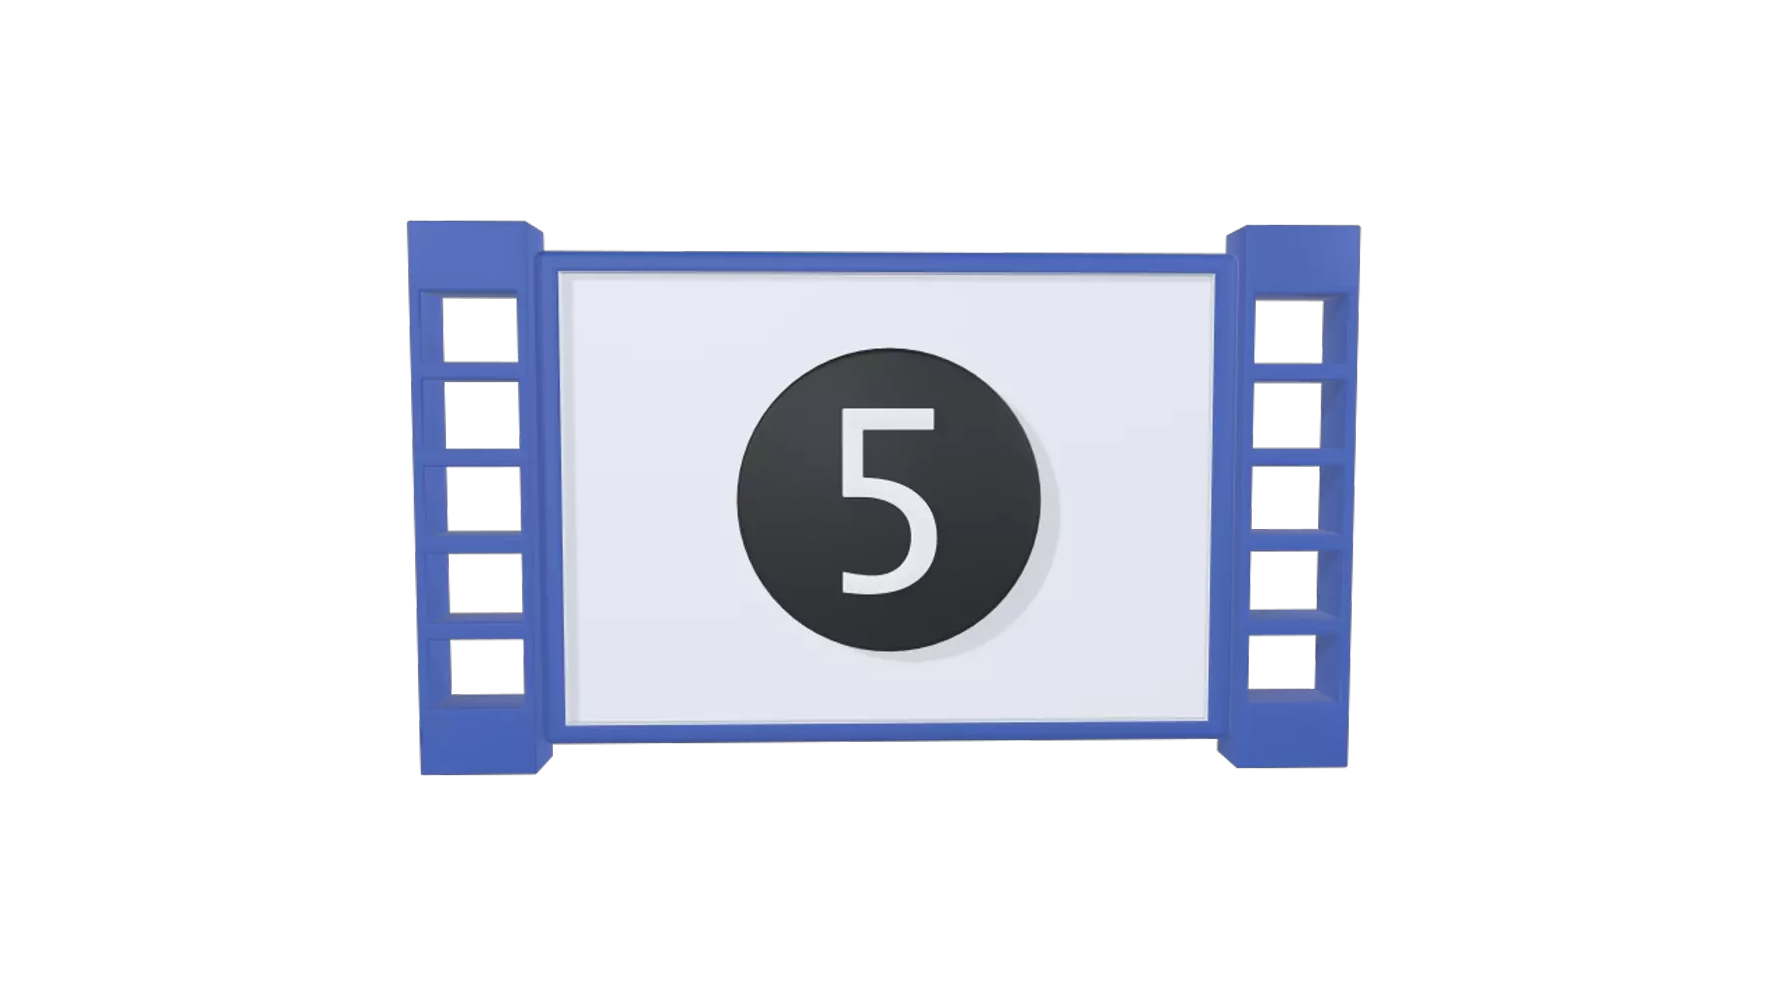 Movie Countdown 3D Graphic